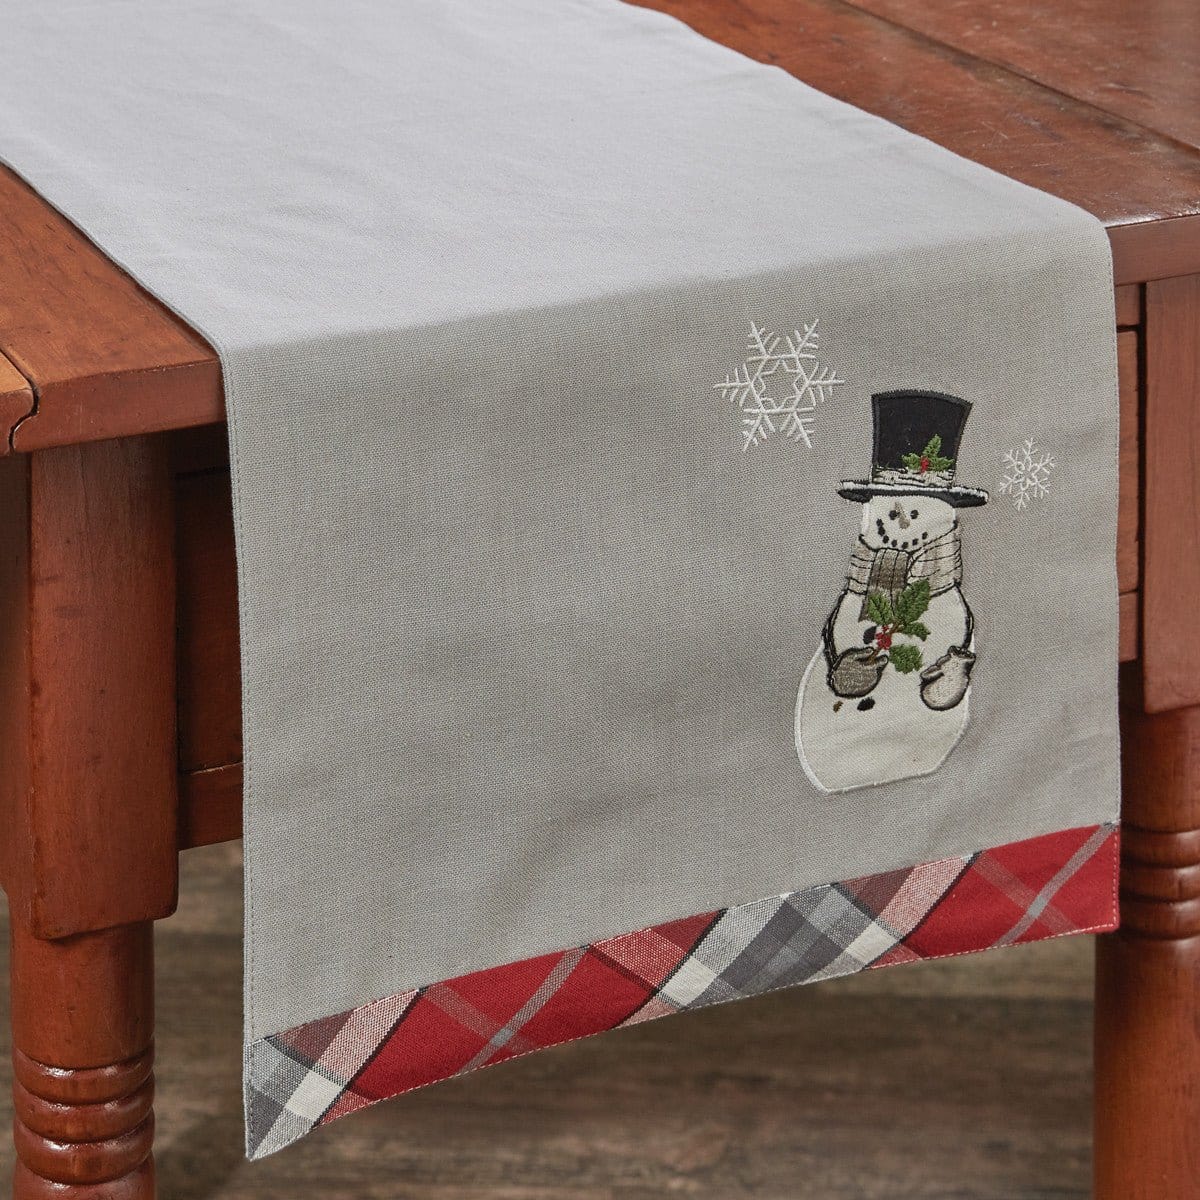 Snowman &amp; Holly Appliqued &amp; Embroidered Table Runner 36&quot; Long-Park Designs-The Village Merchant